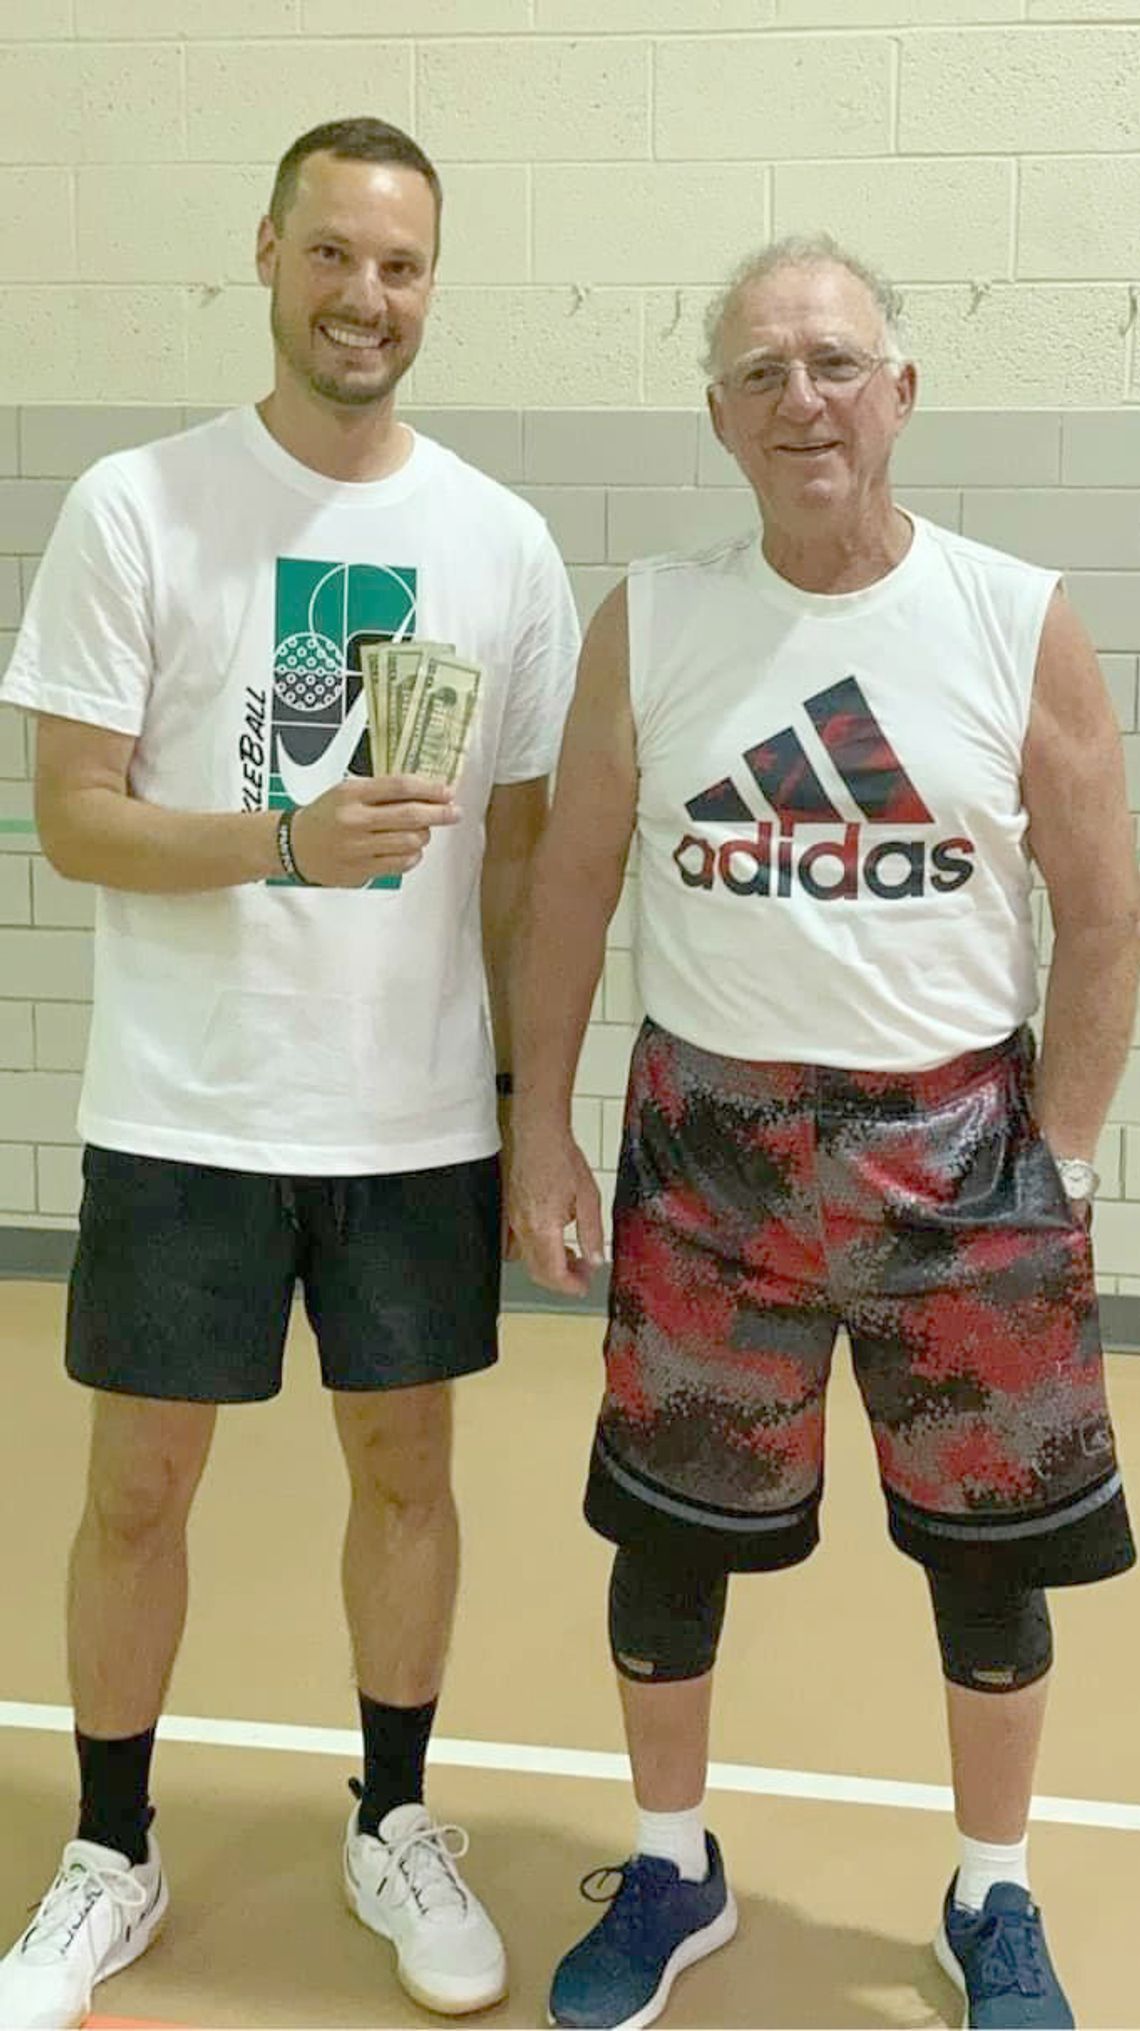 First place in the Peter Mitchell Pickleball Tournament went to Joseph Nikolanci and Mike Karsnia from International Falls